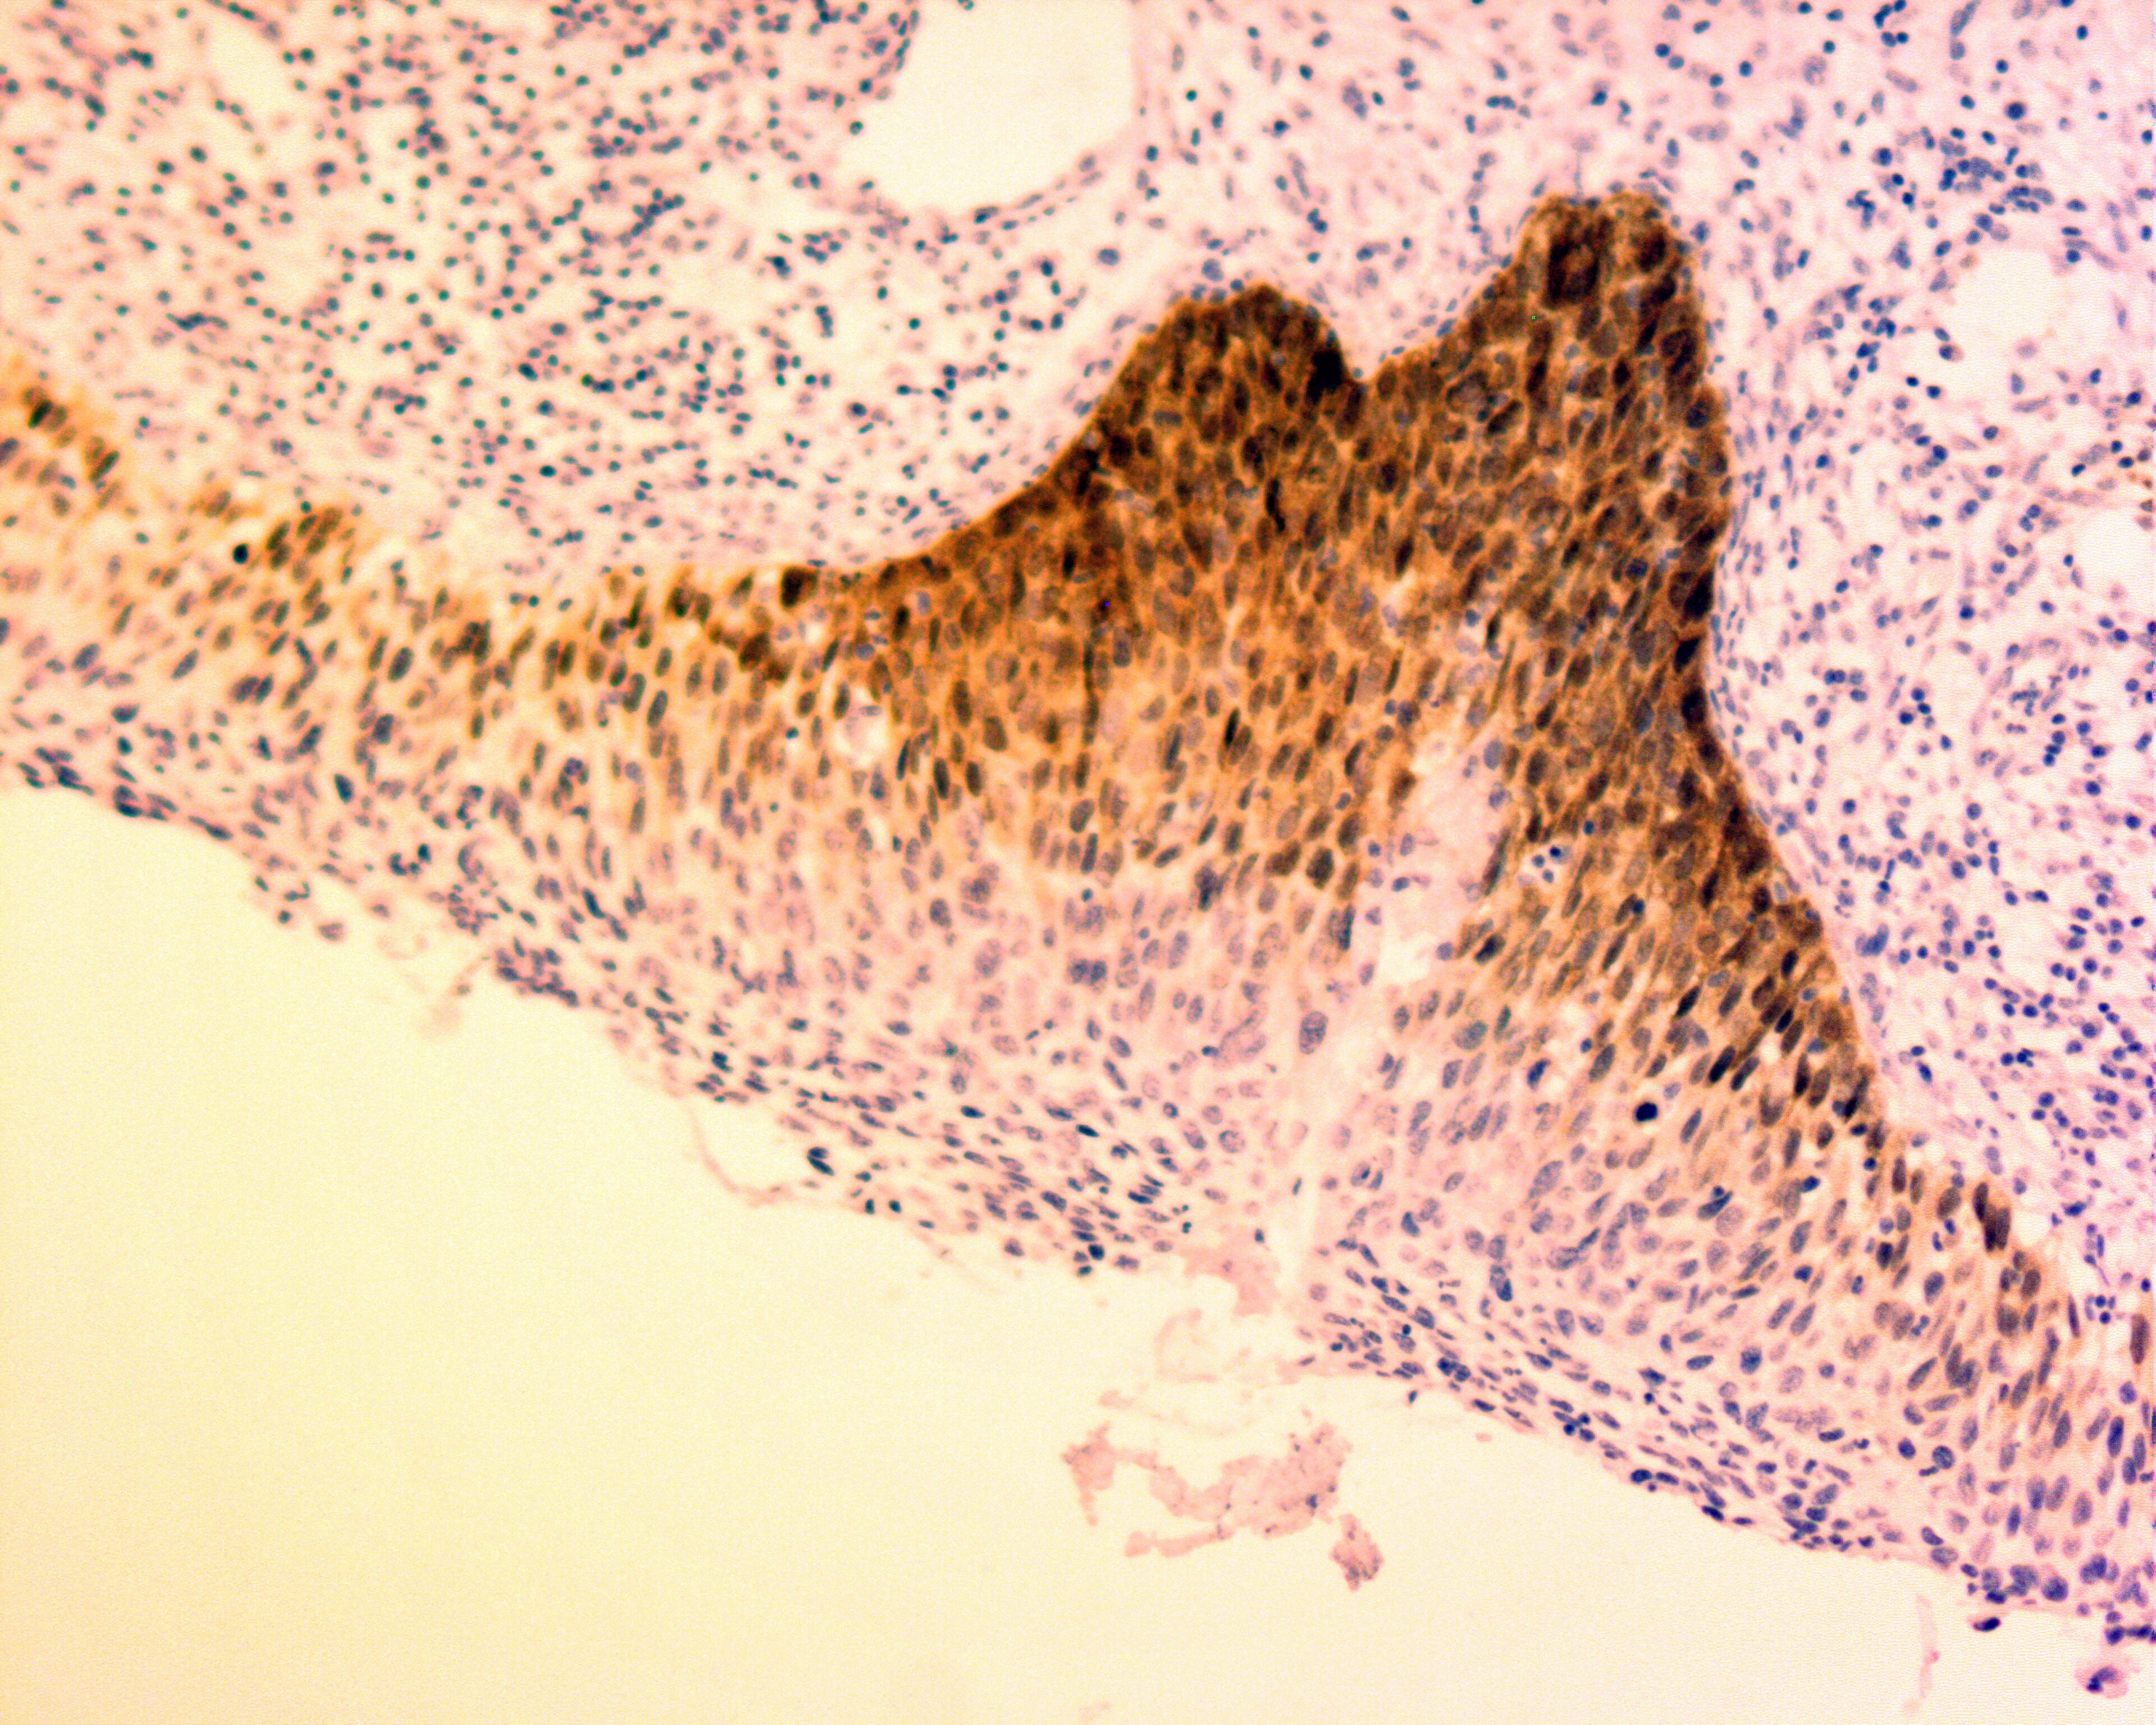 Figure 2. Immunohistochemical staining of formalin fixed, paraffin embedded  tissue from an HPV infected preneoplastic lesion in the uterine cervix using p16-INK4a antibody (Cat. No. C170M). Antigen retreival was performed with Tris/EDTA buffer pH 9.